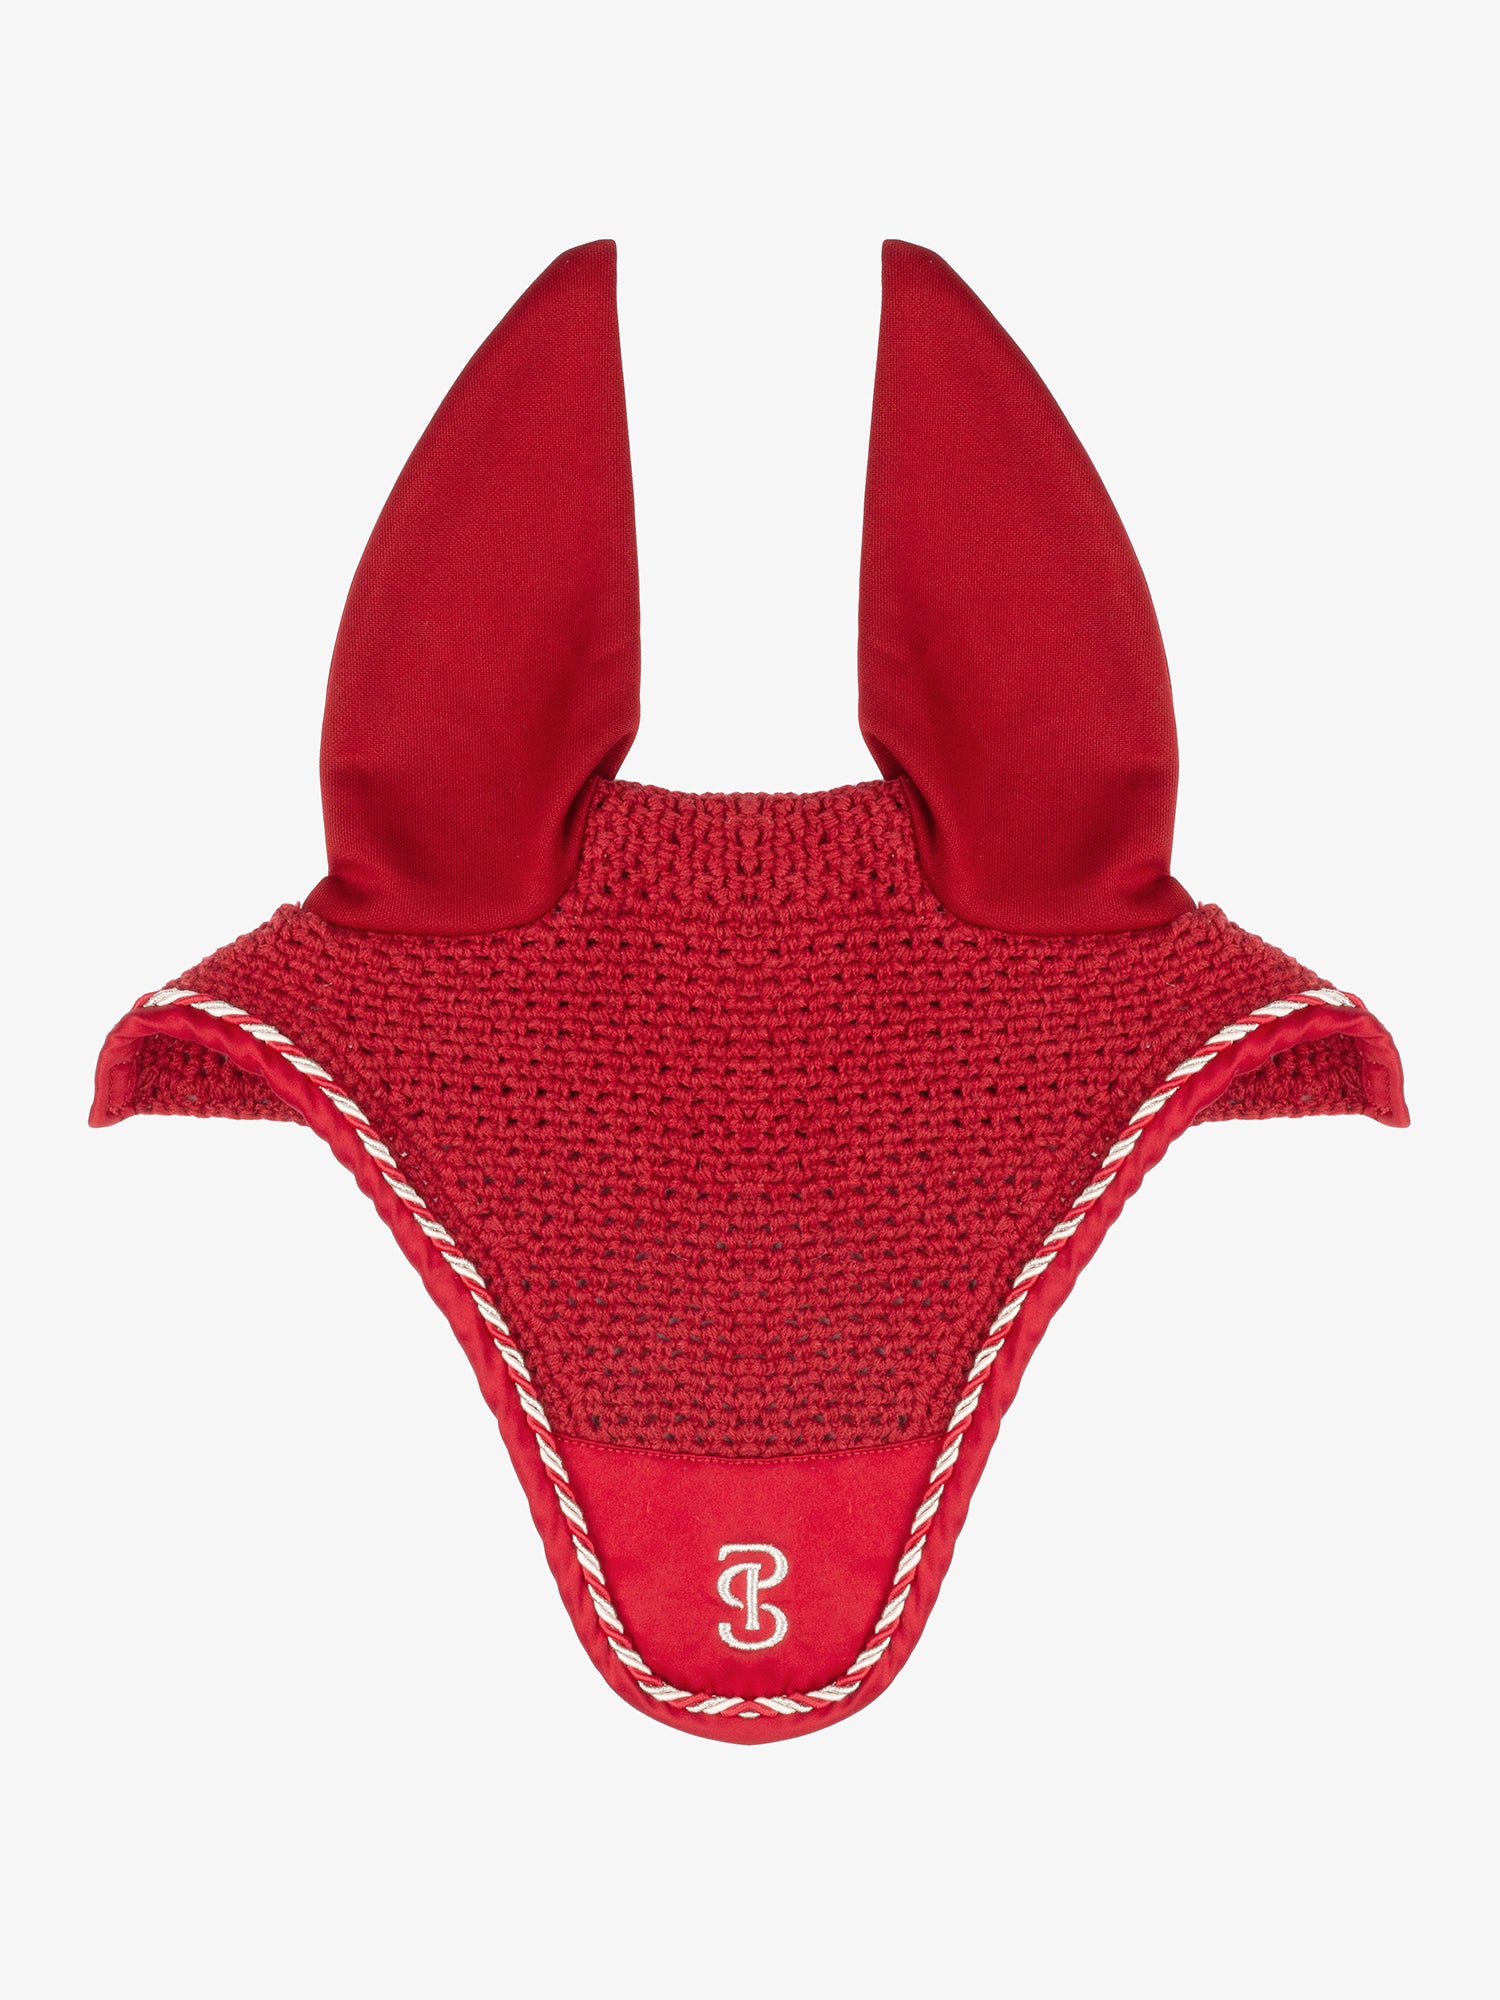 PS of Sweden Chilli red fly hood